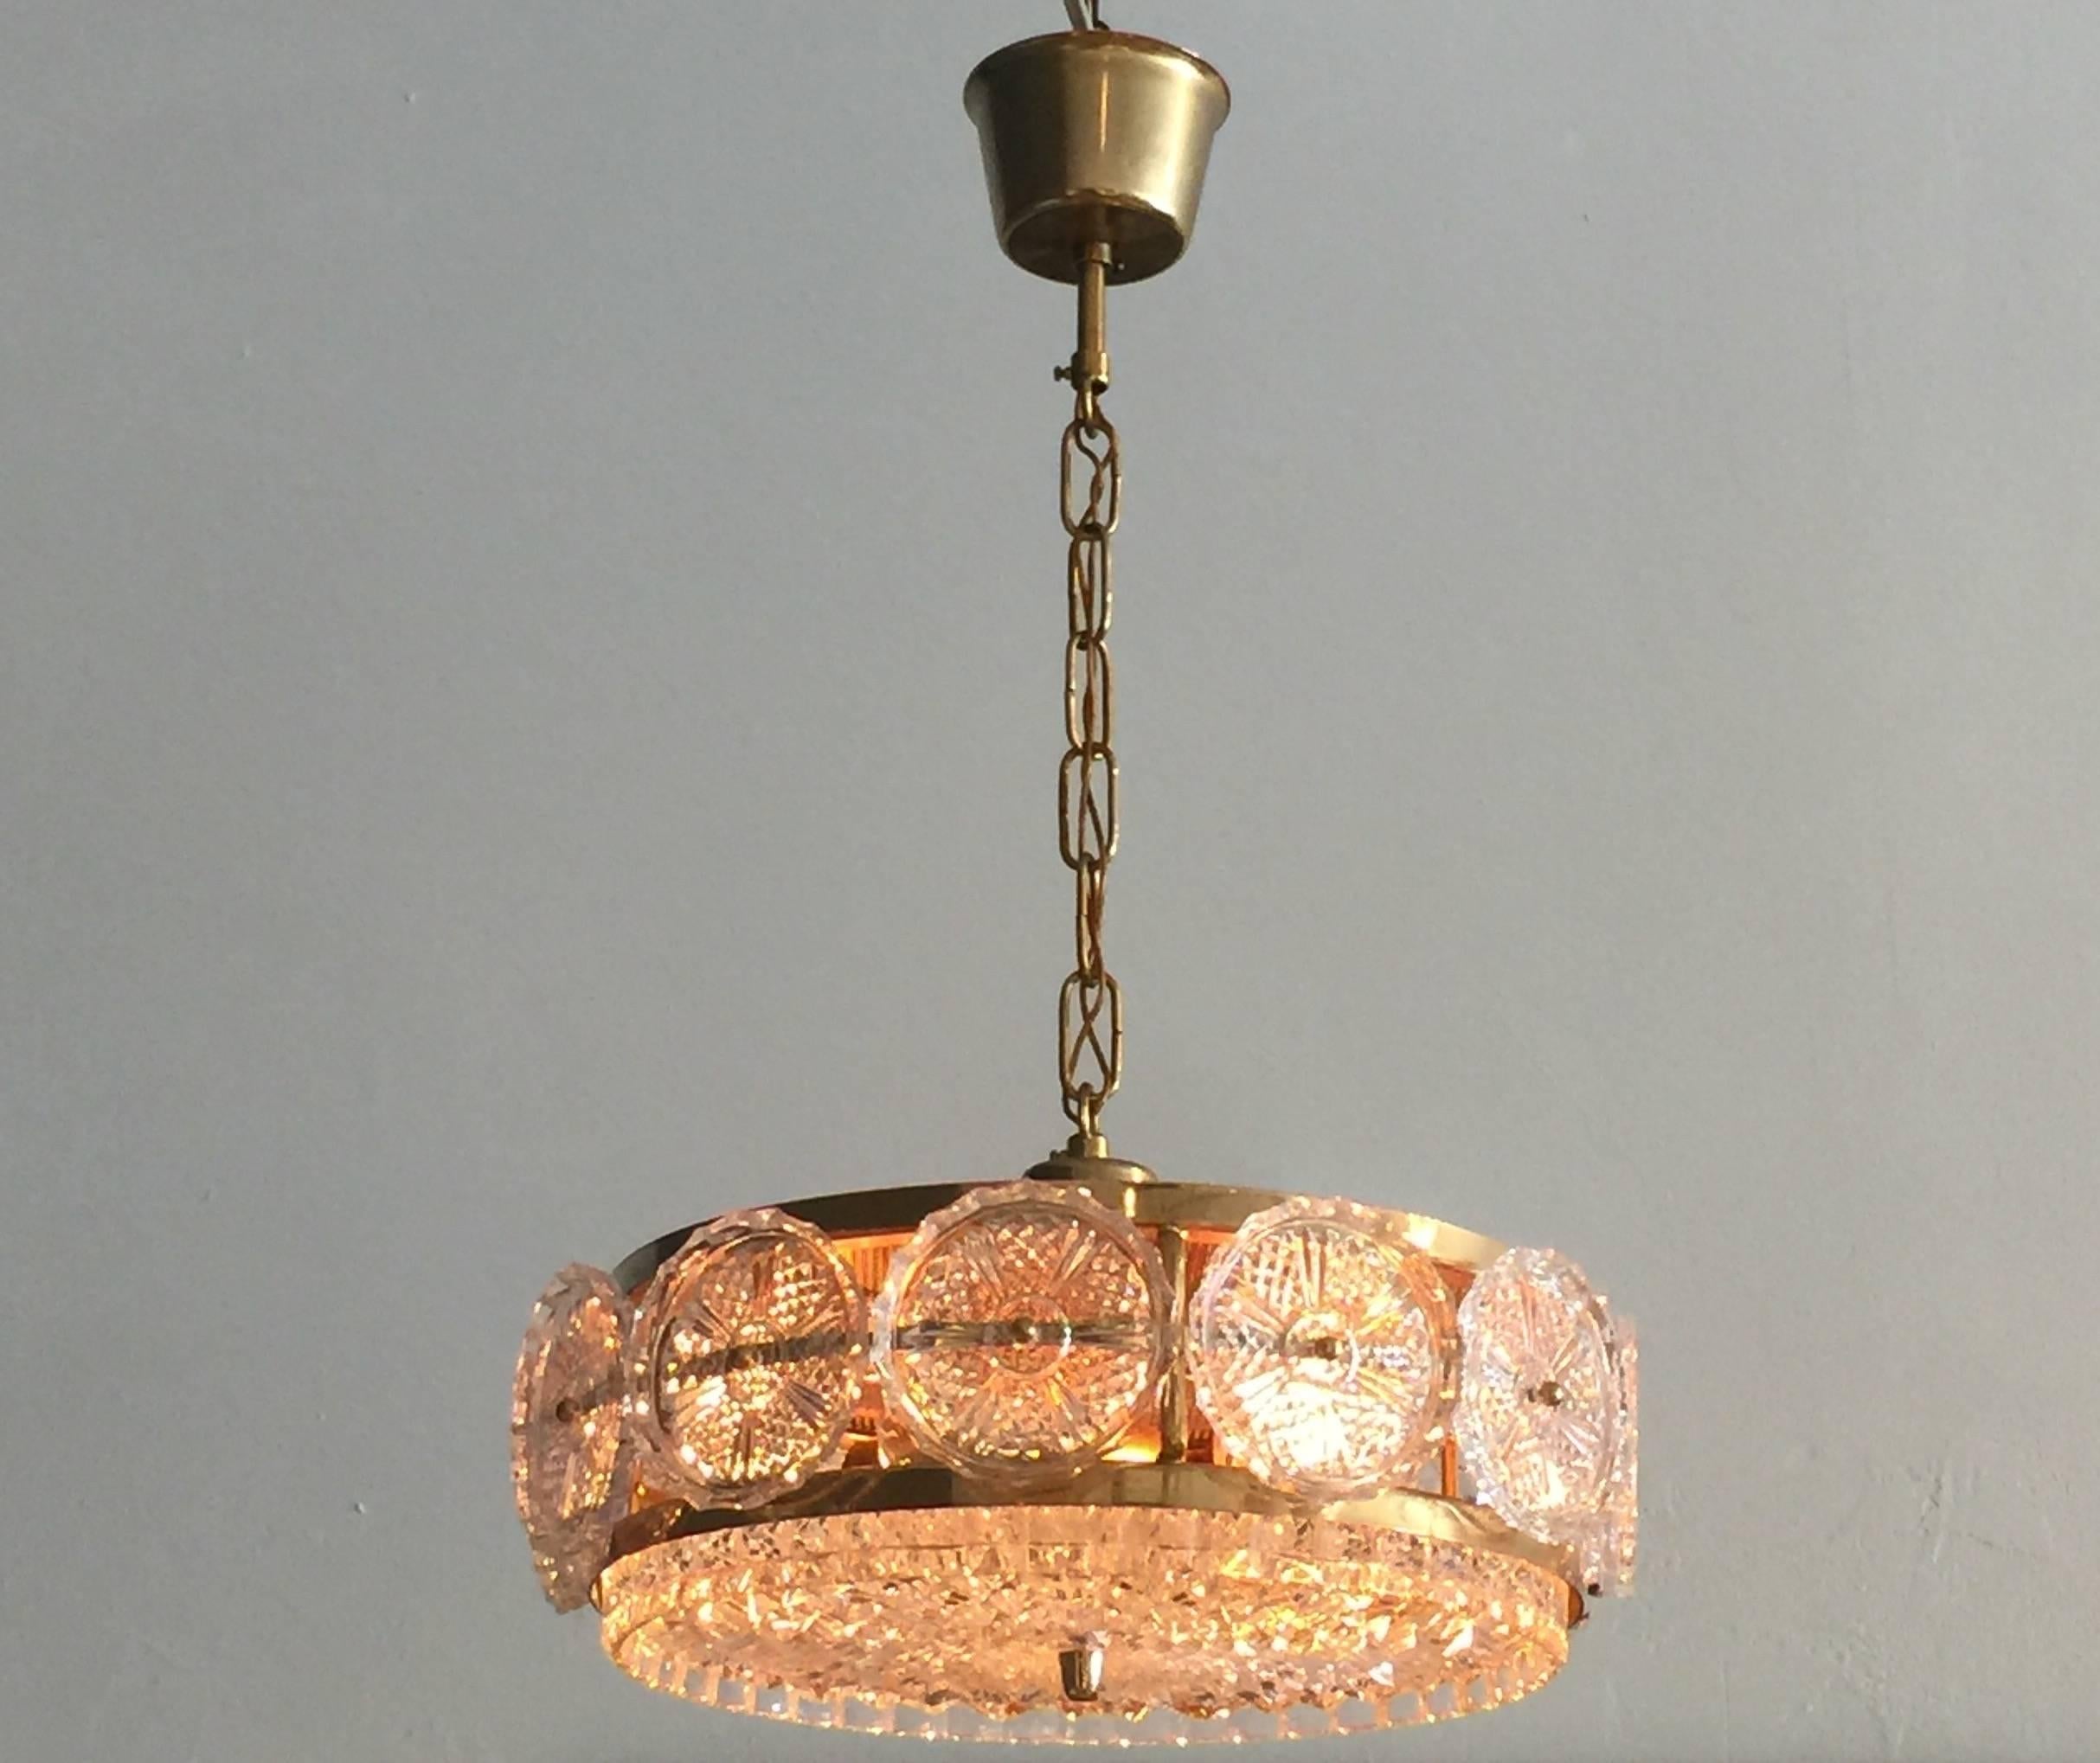 Sweden's Orrefors glass is world reknowned, this art glass chandelier is in wonderful original vintage condition.